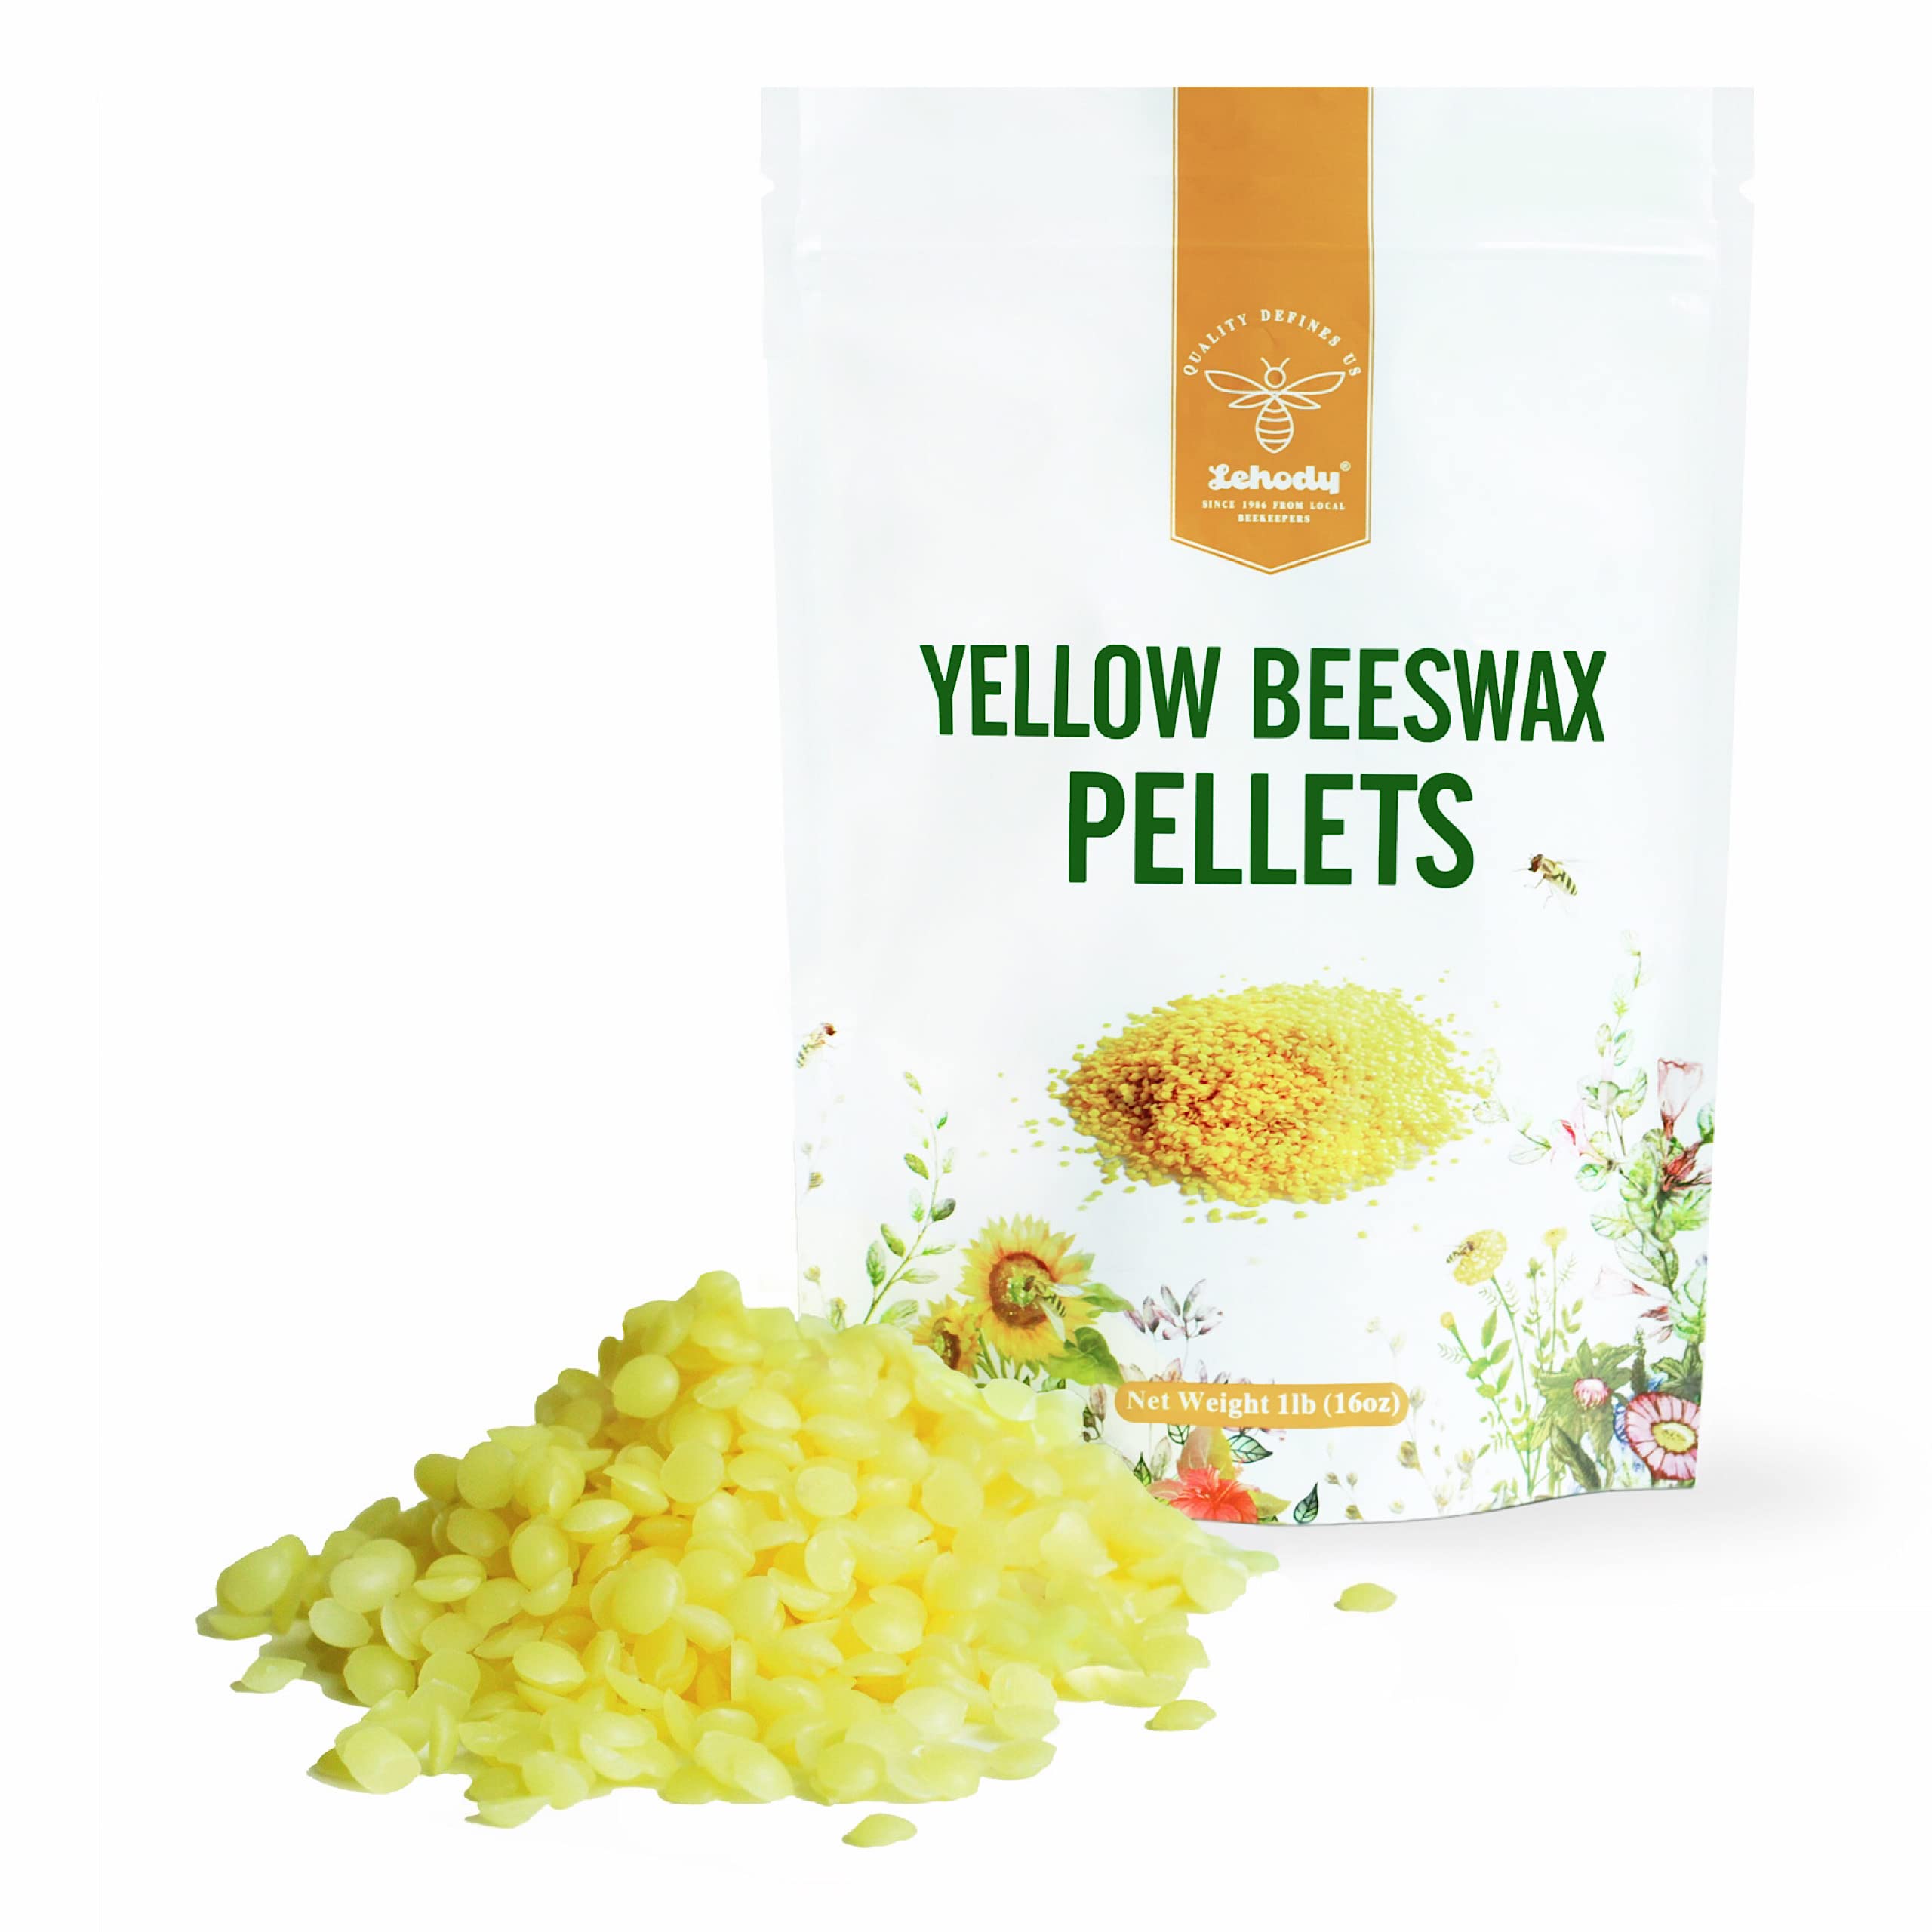 Natural Beeswax For Cosmetic Use